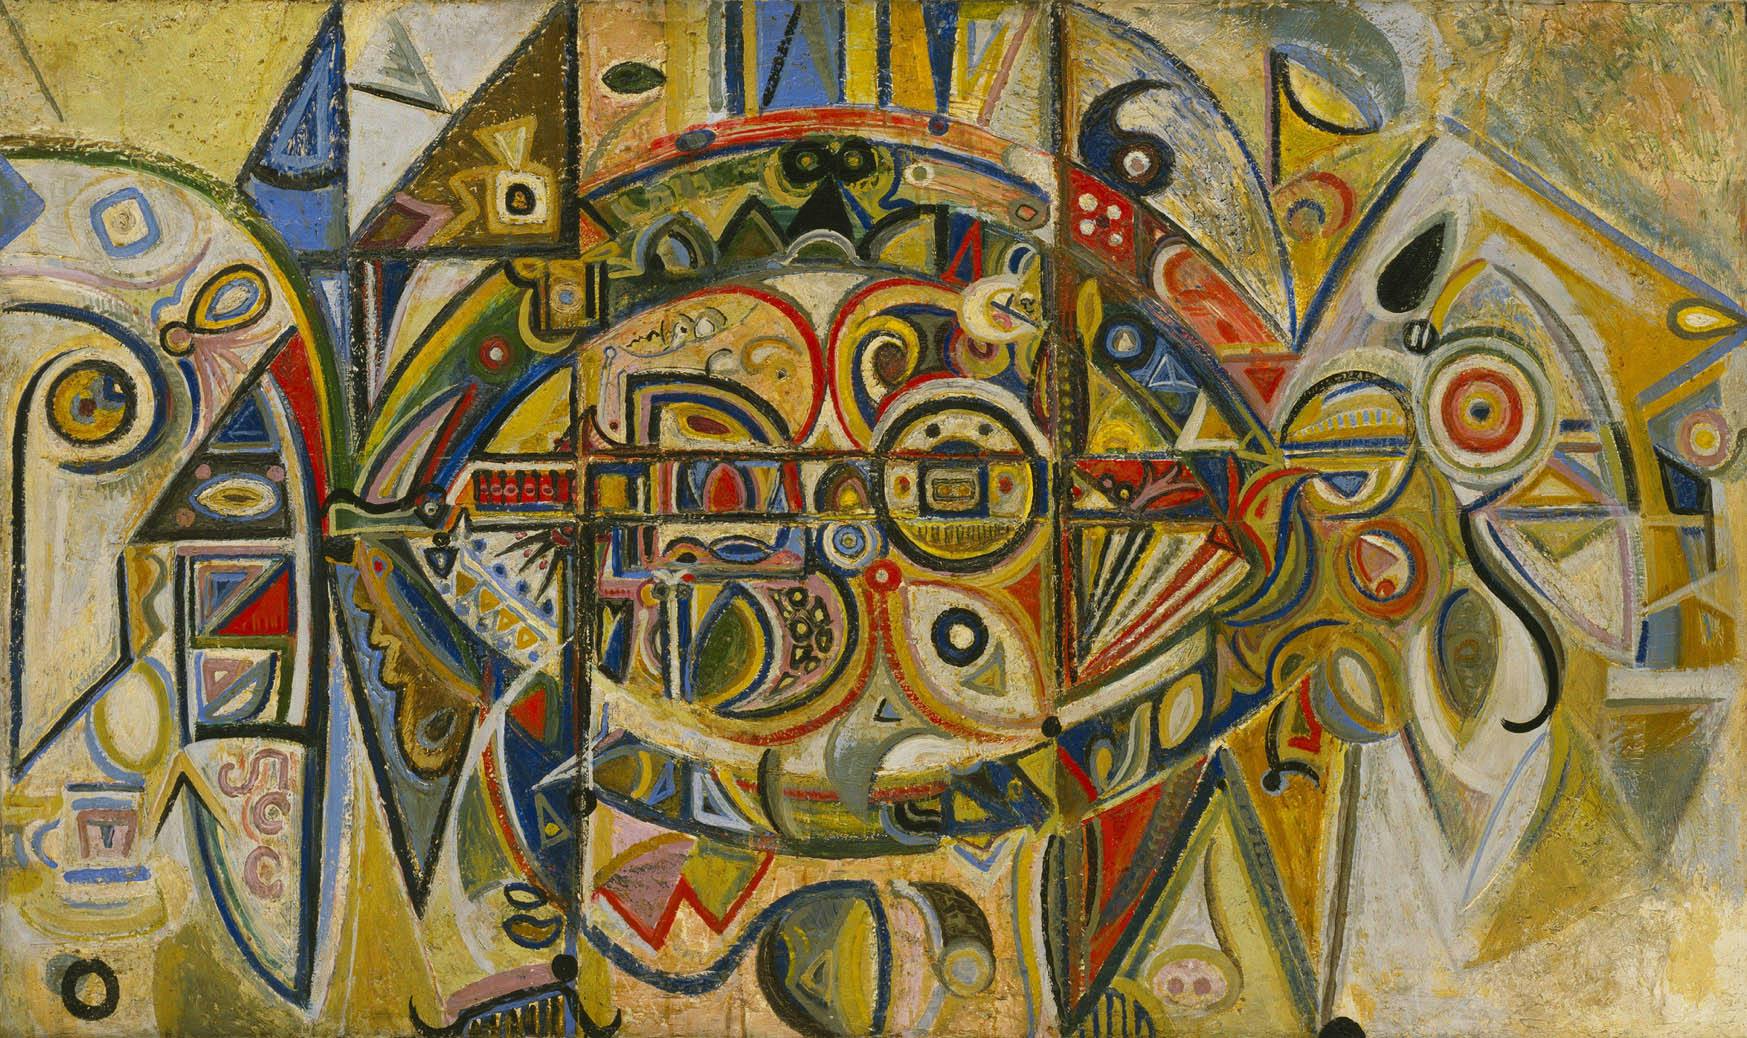 Richard Pousette-Dart  The Guggenheim Museums and Foundation